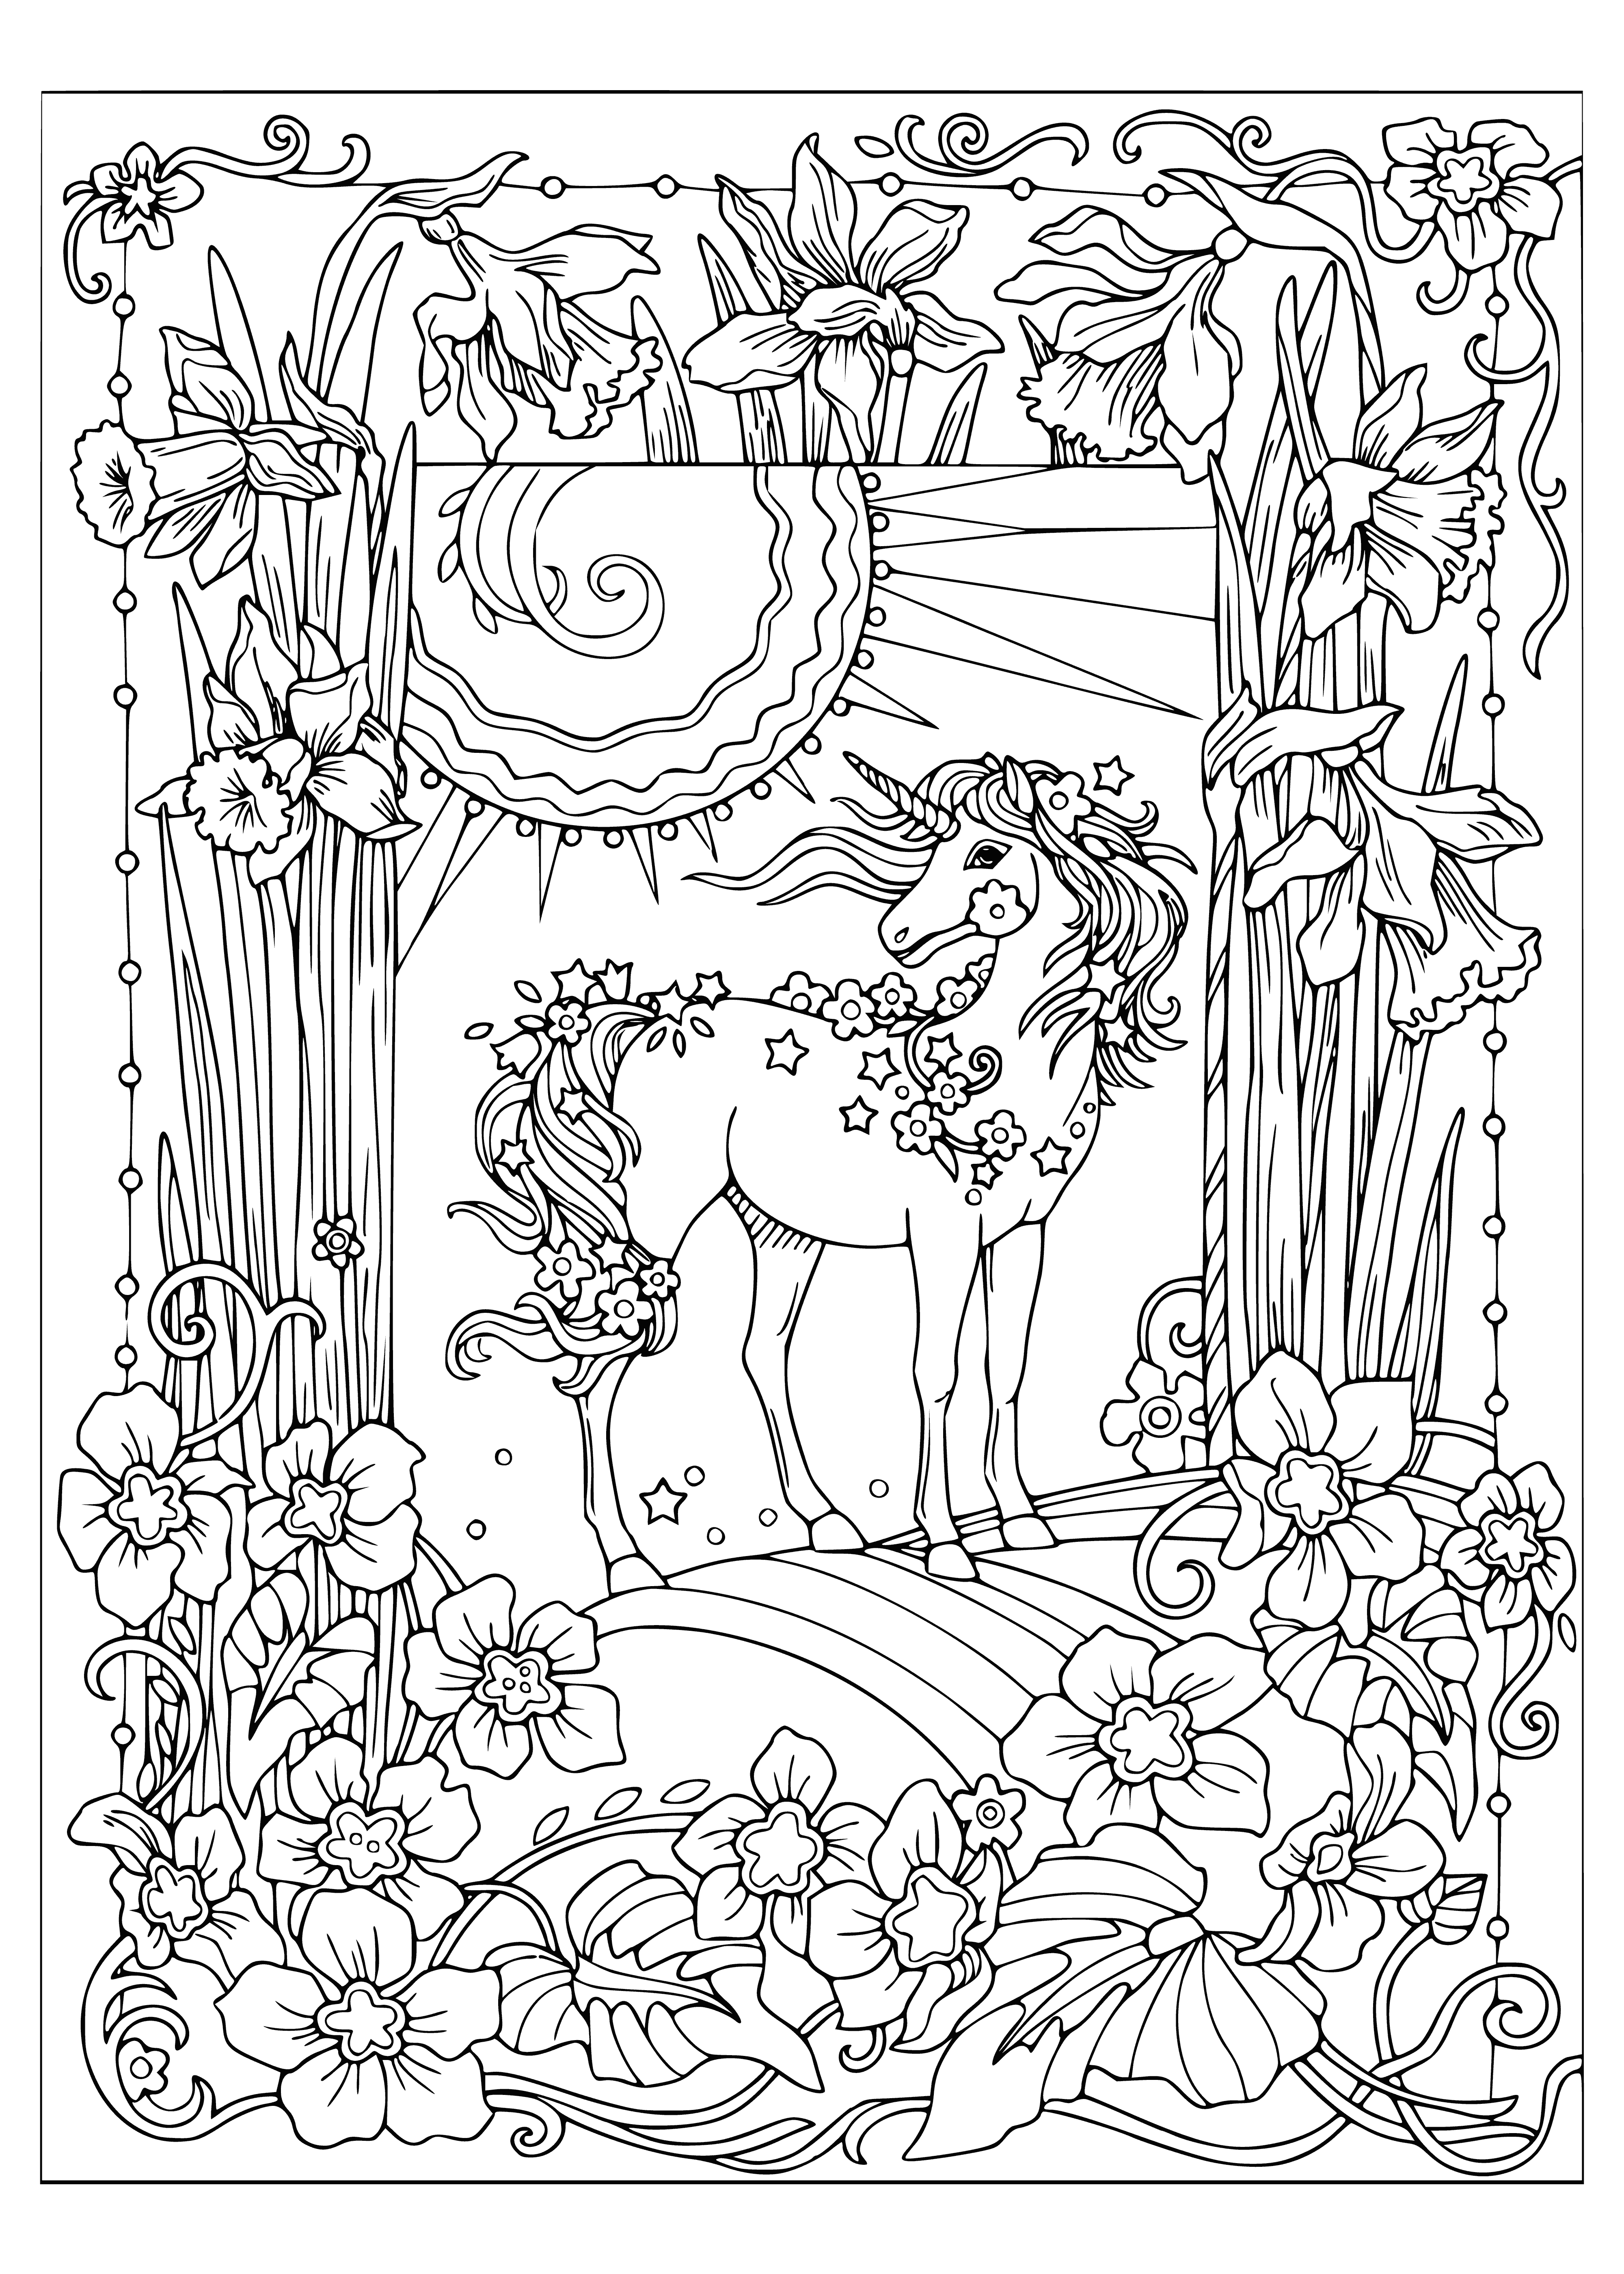 coloring page: A majestic unicorn stands in a flower-filled garden; white coat, silver mane, inviting us to its world of magic & mystery. #Fantasy